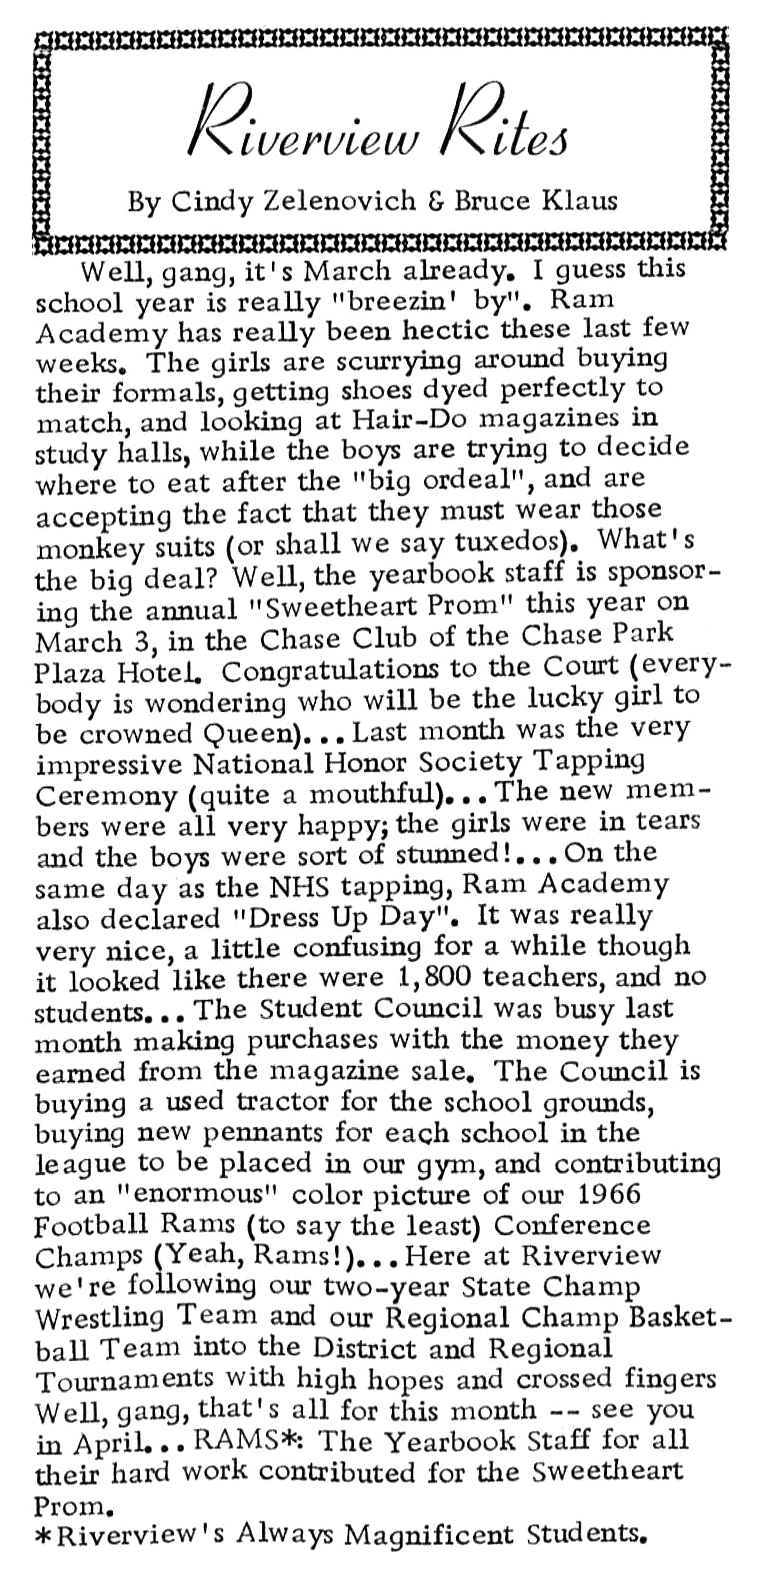 RIVERVIEW RITES: MARCH 1967